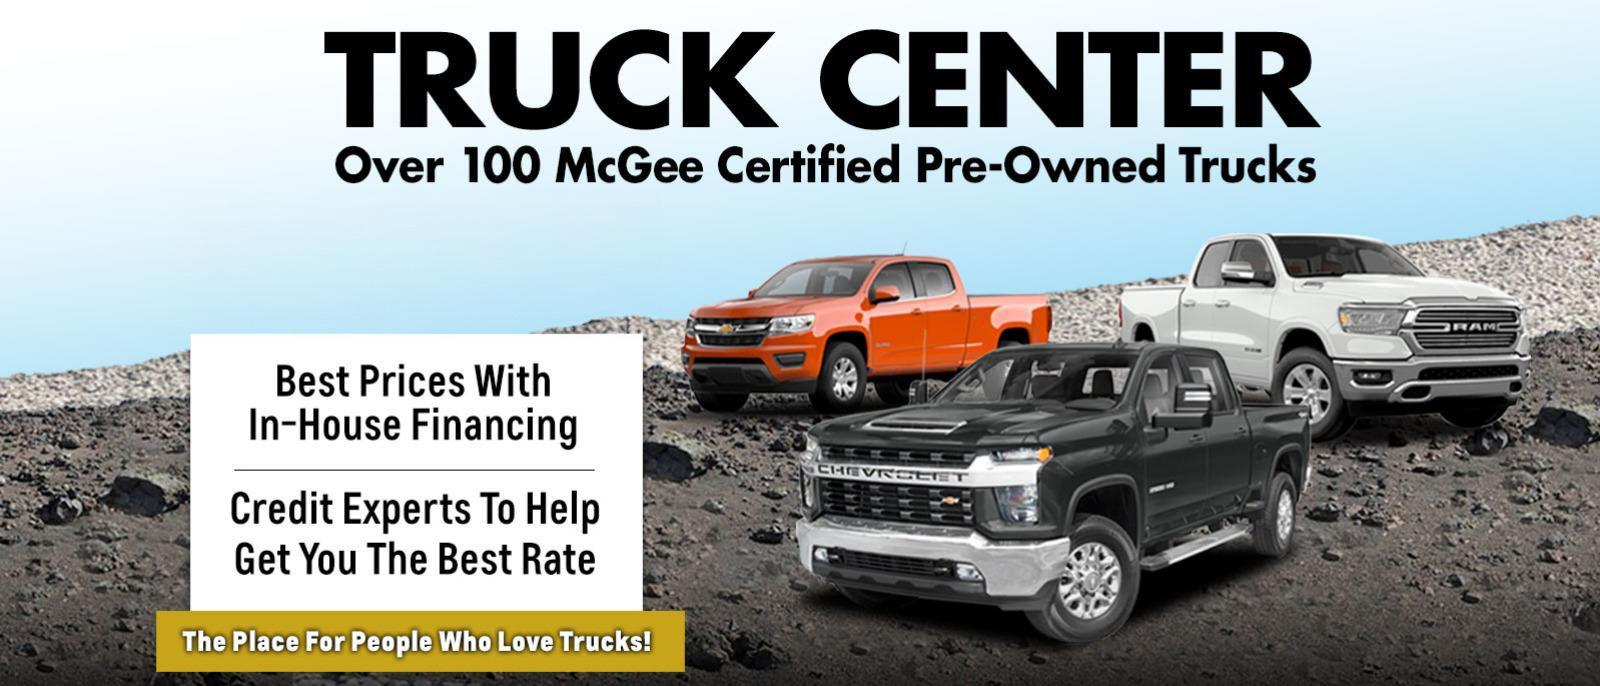 Truck Center at McGee Chevy